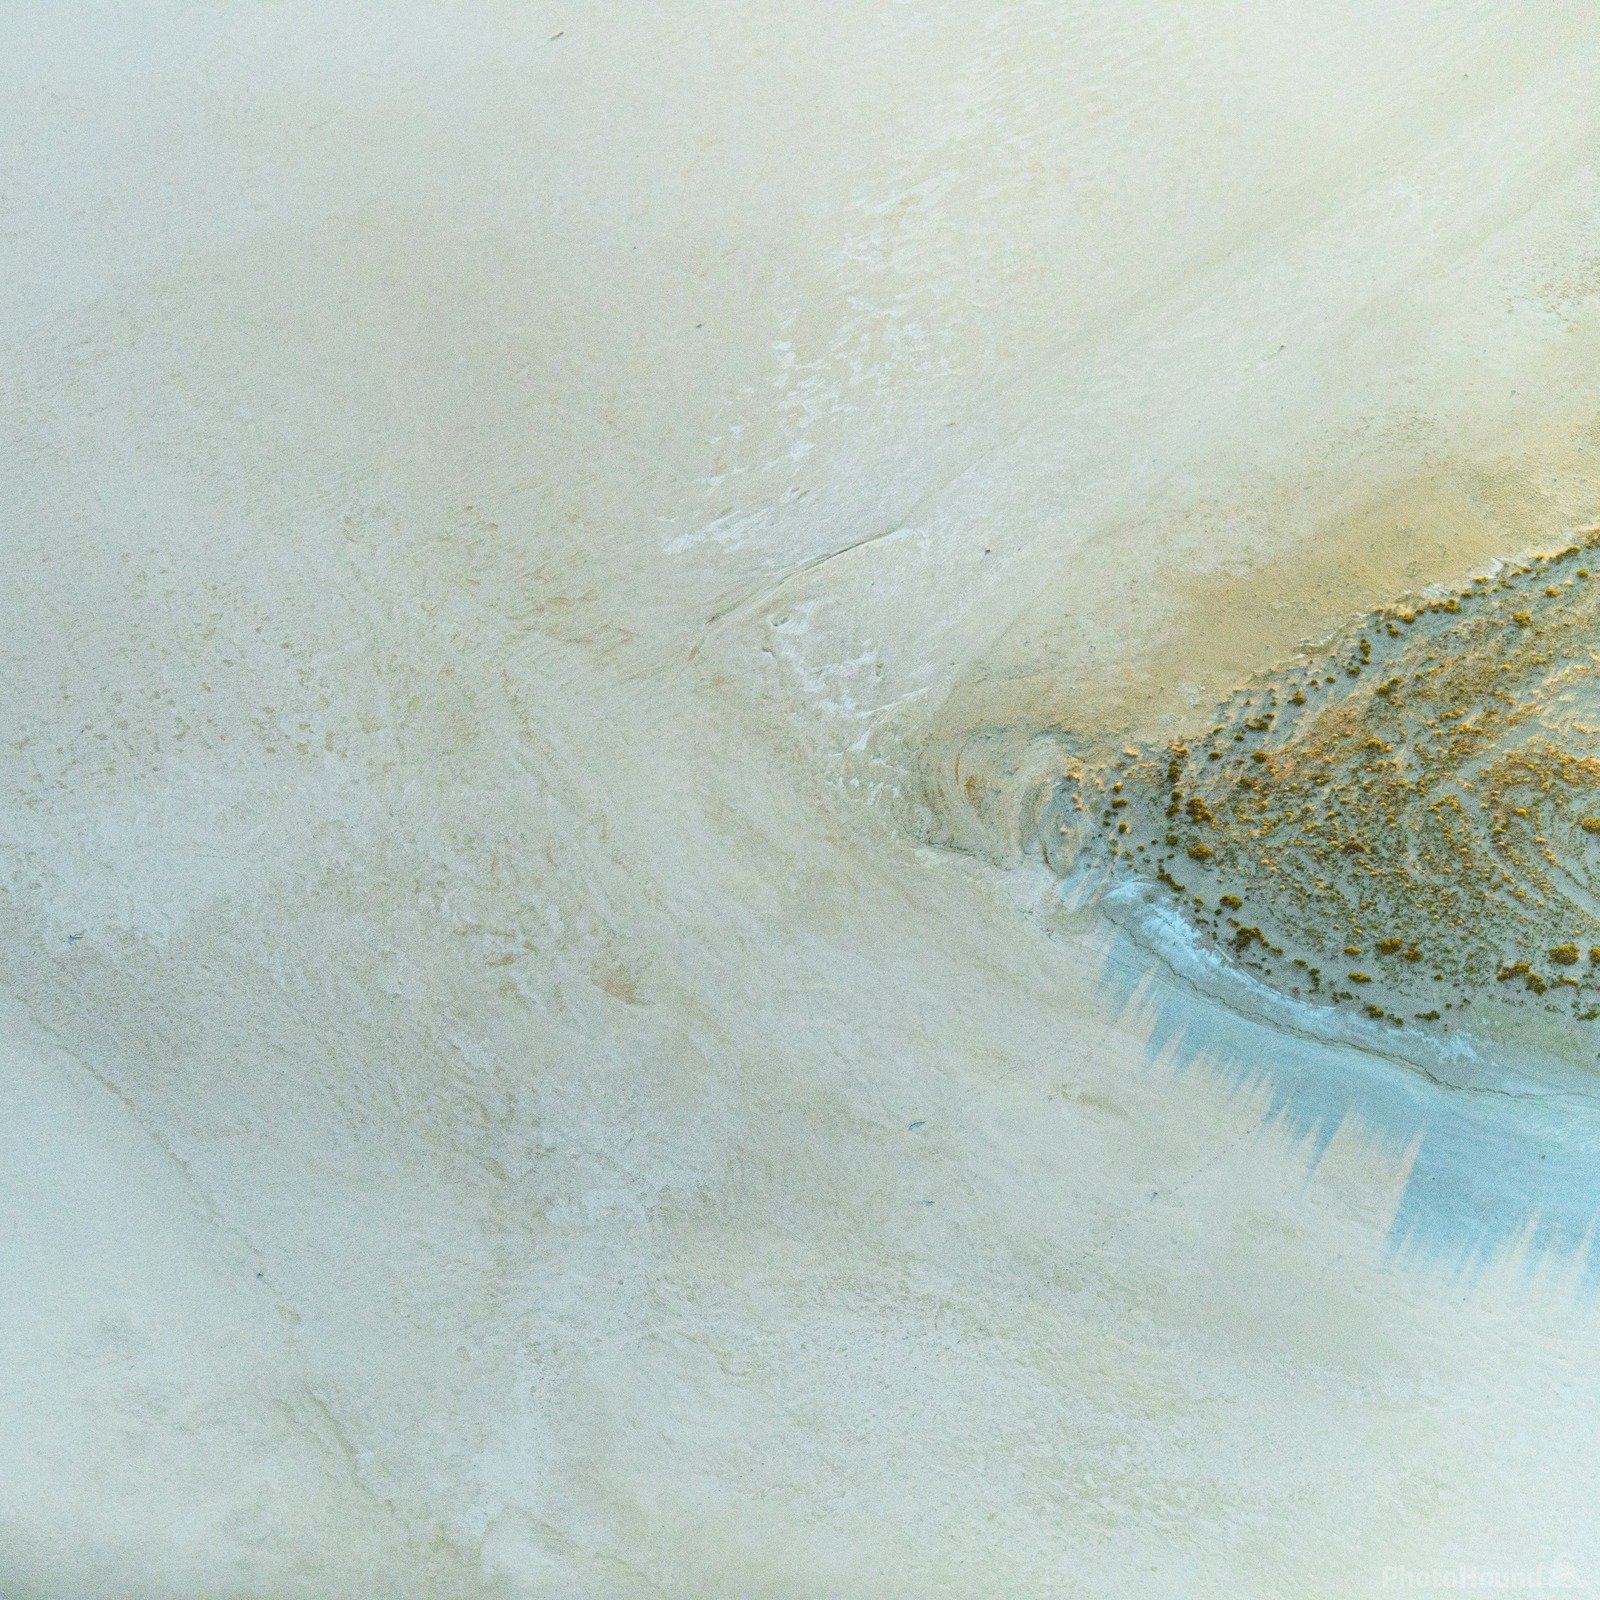 Image of Lake Eyre - Aerial Photography by Ralph McConaghy